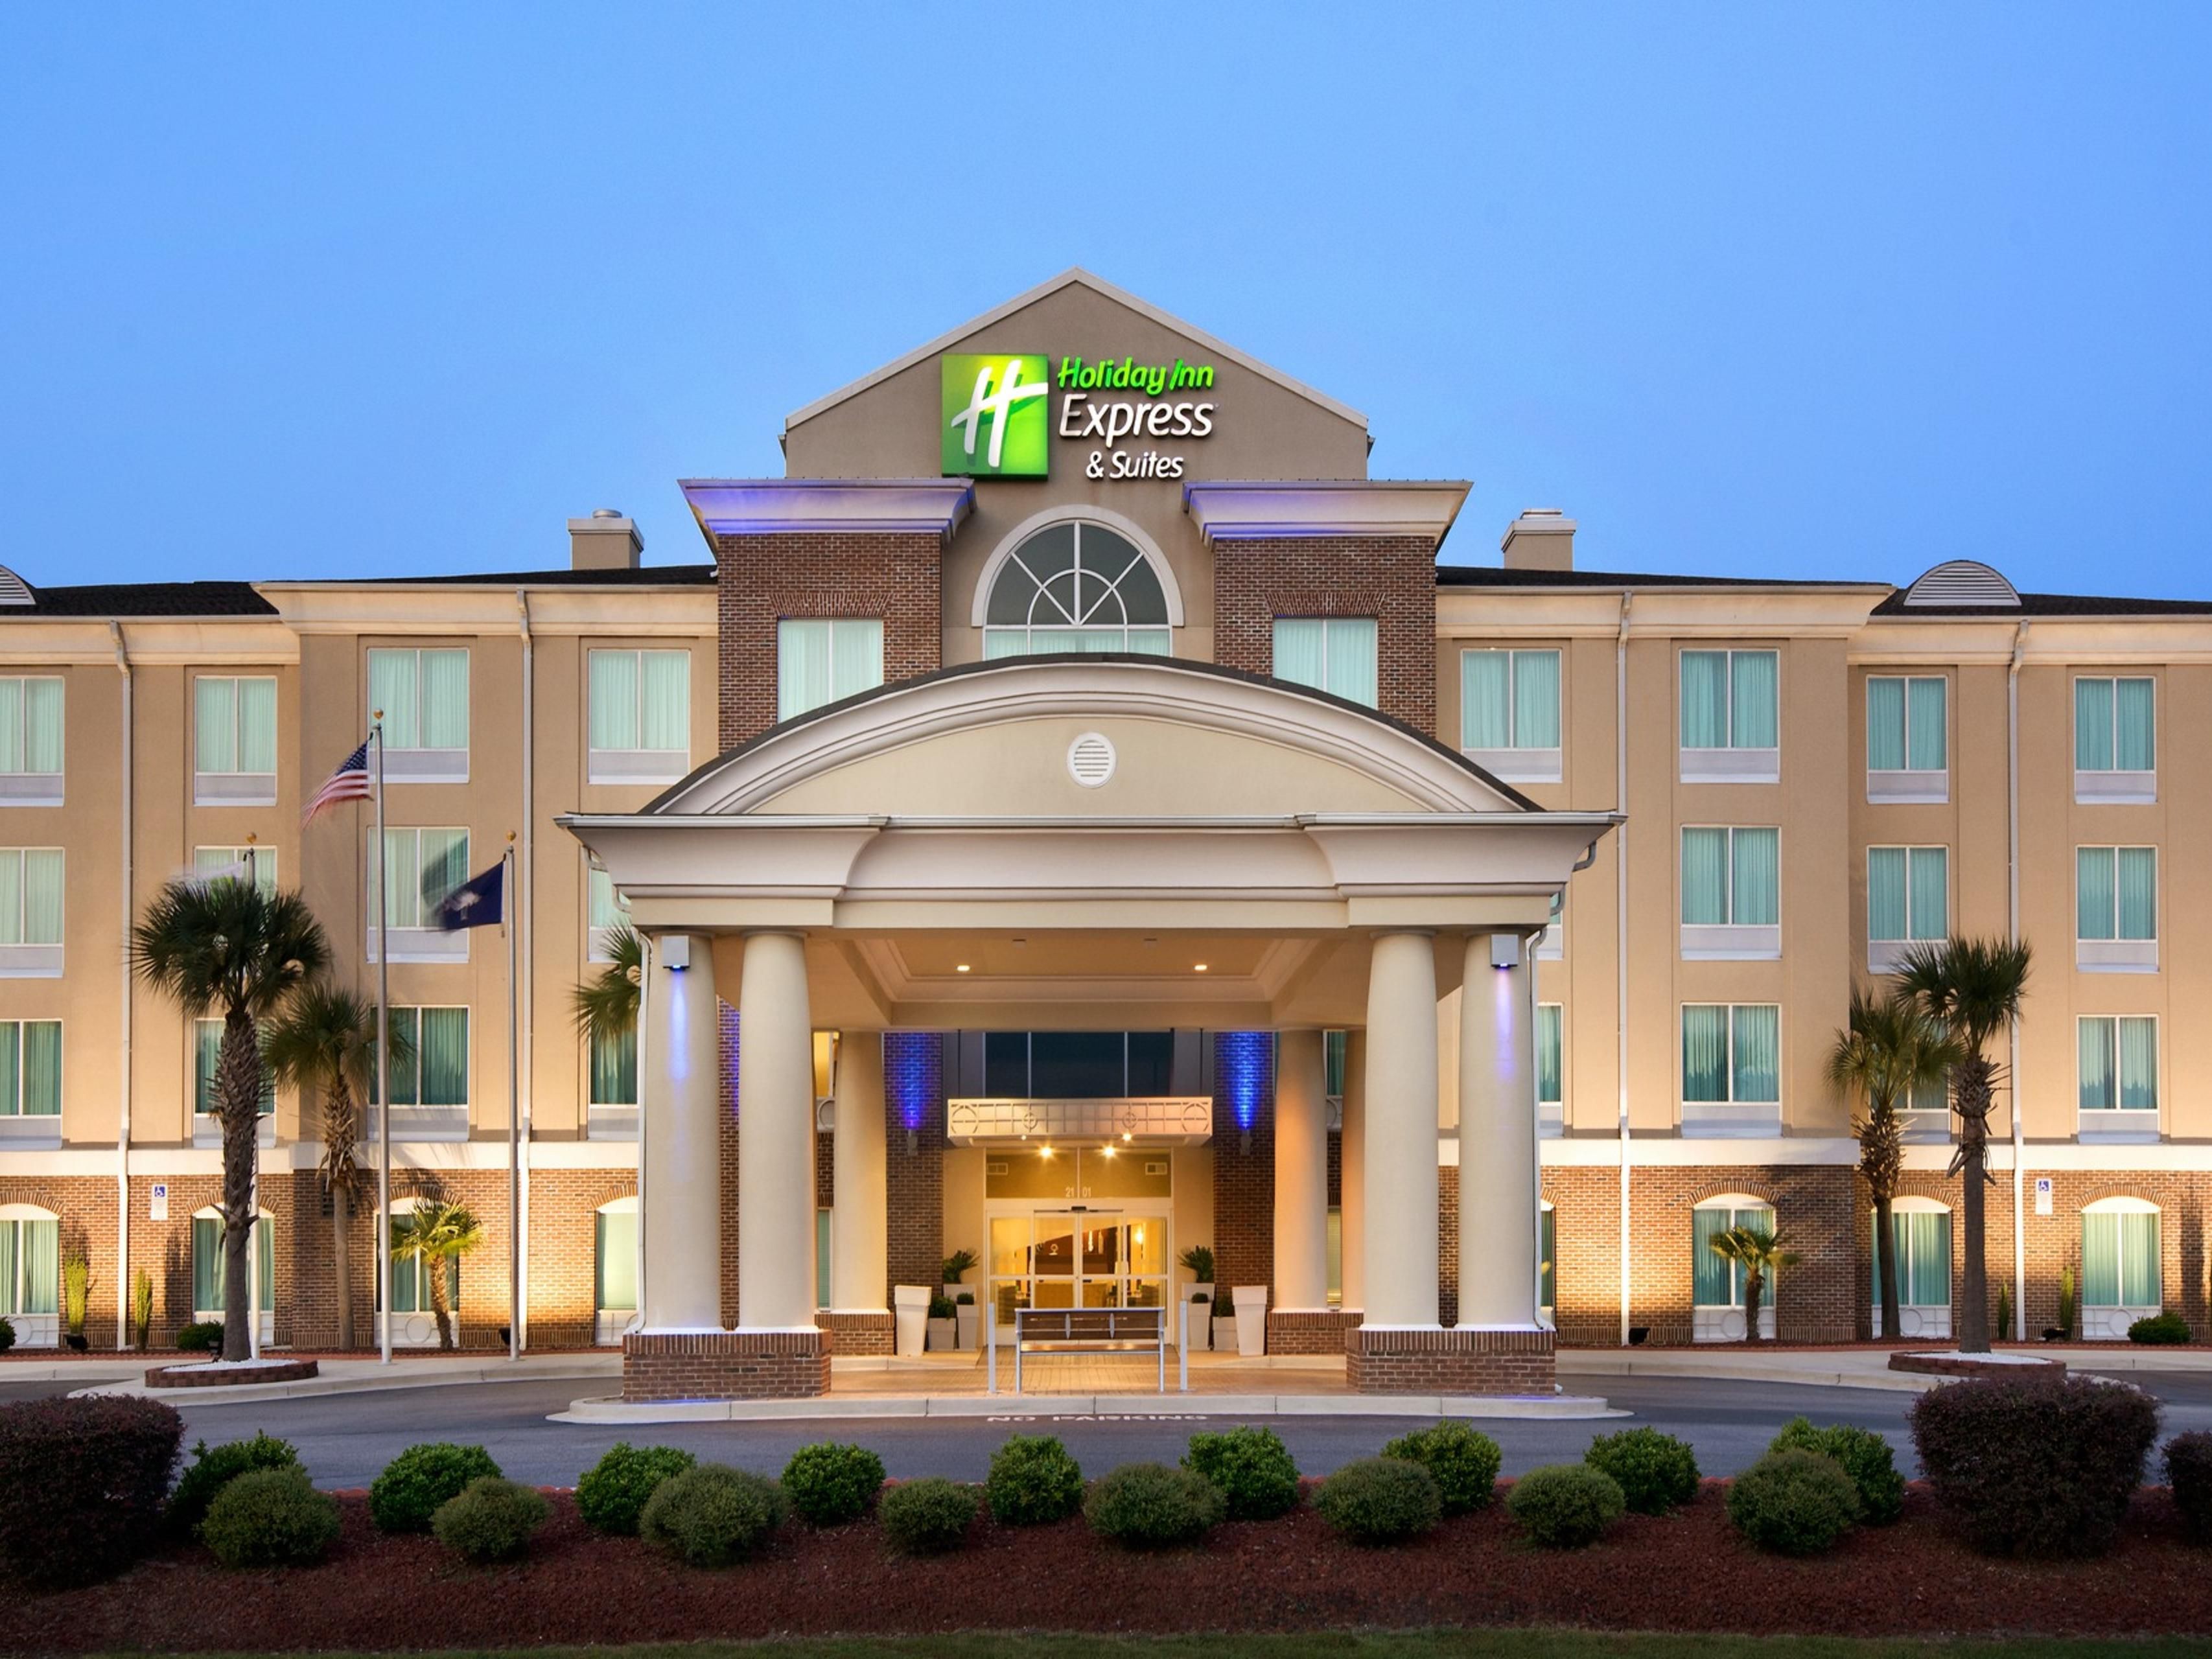 Holiday Inn Express And Suites Florence 3503329694 4x3